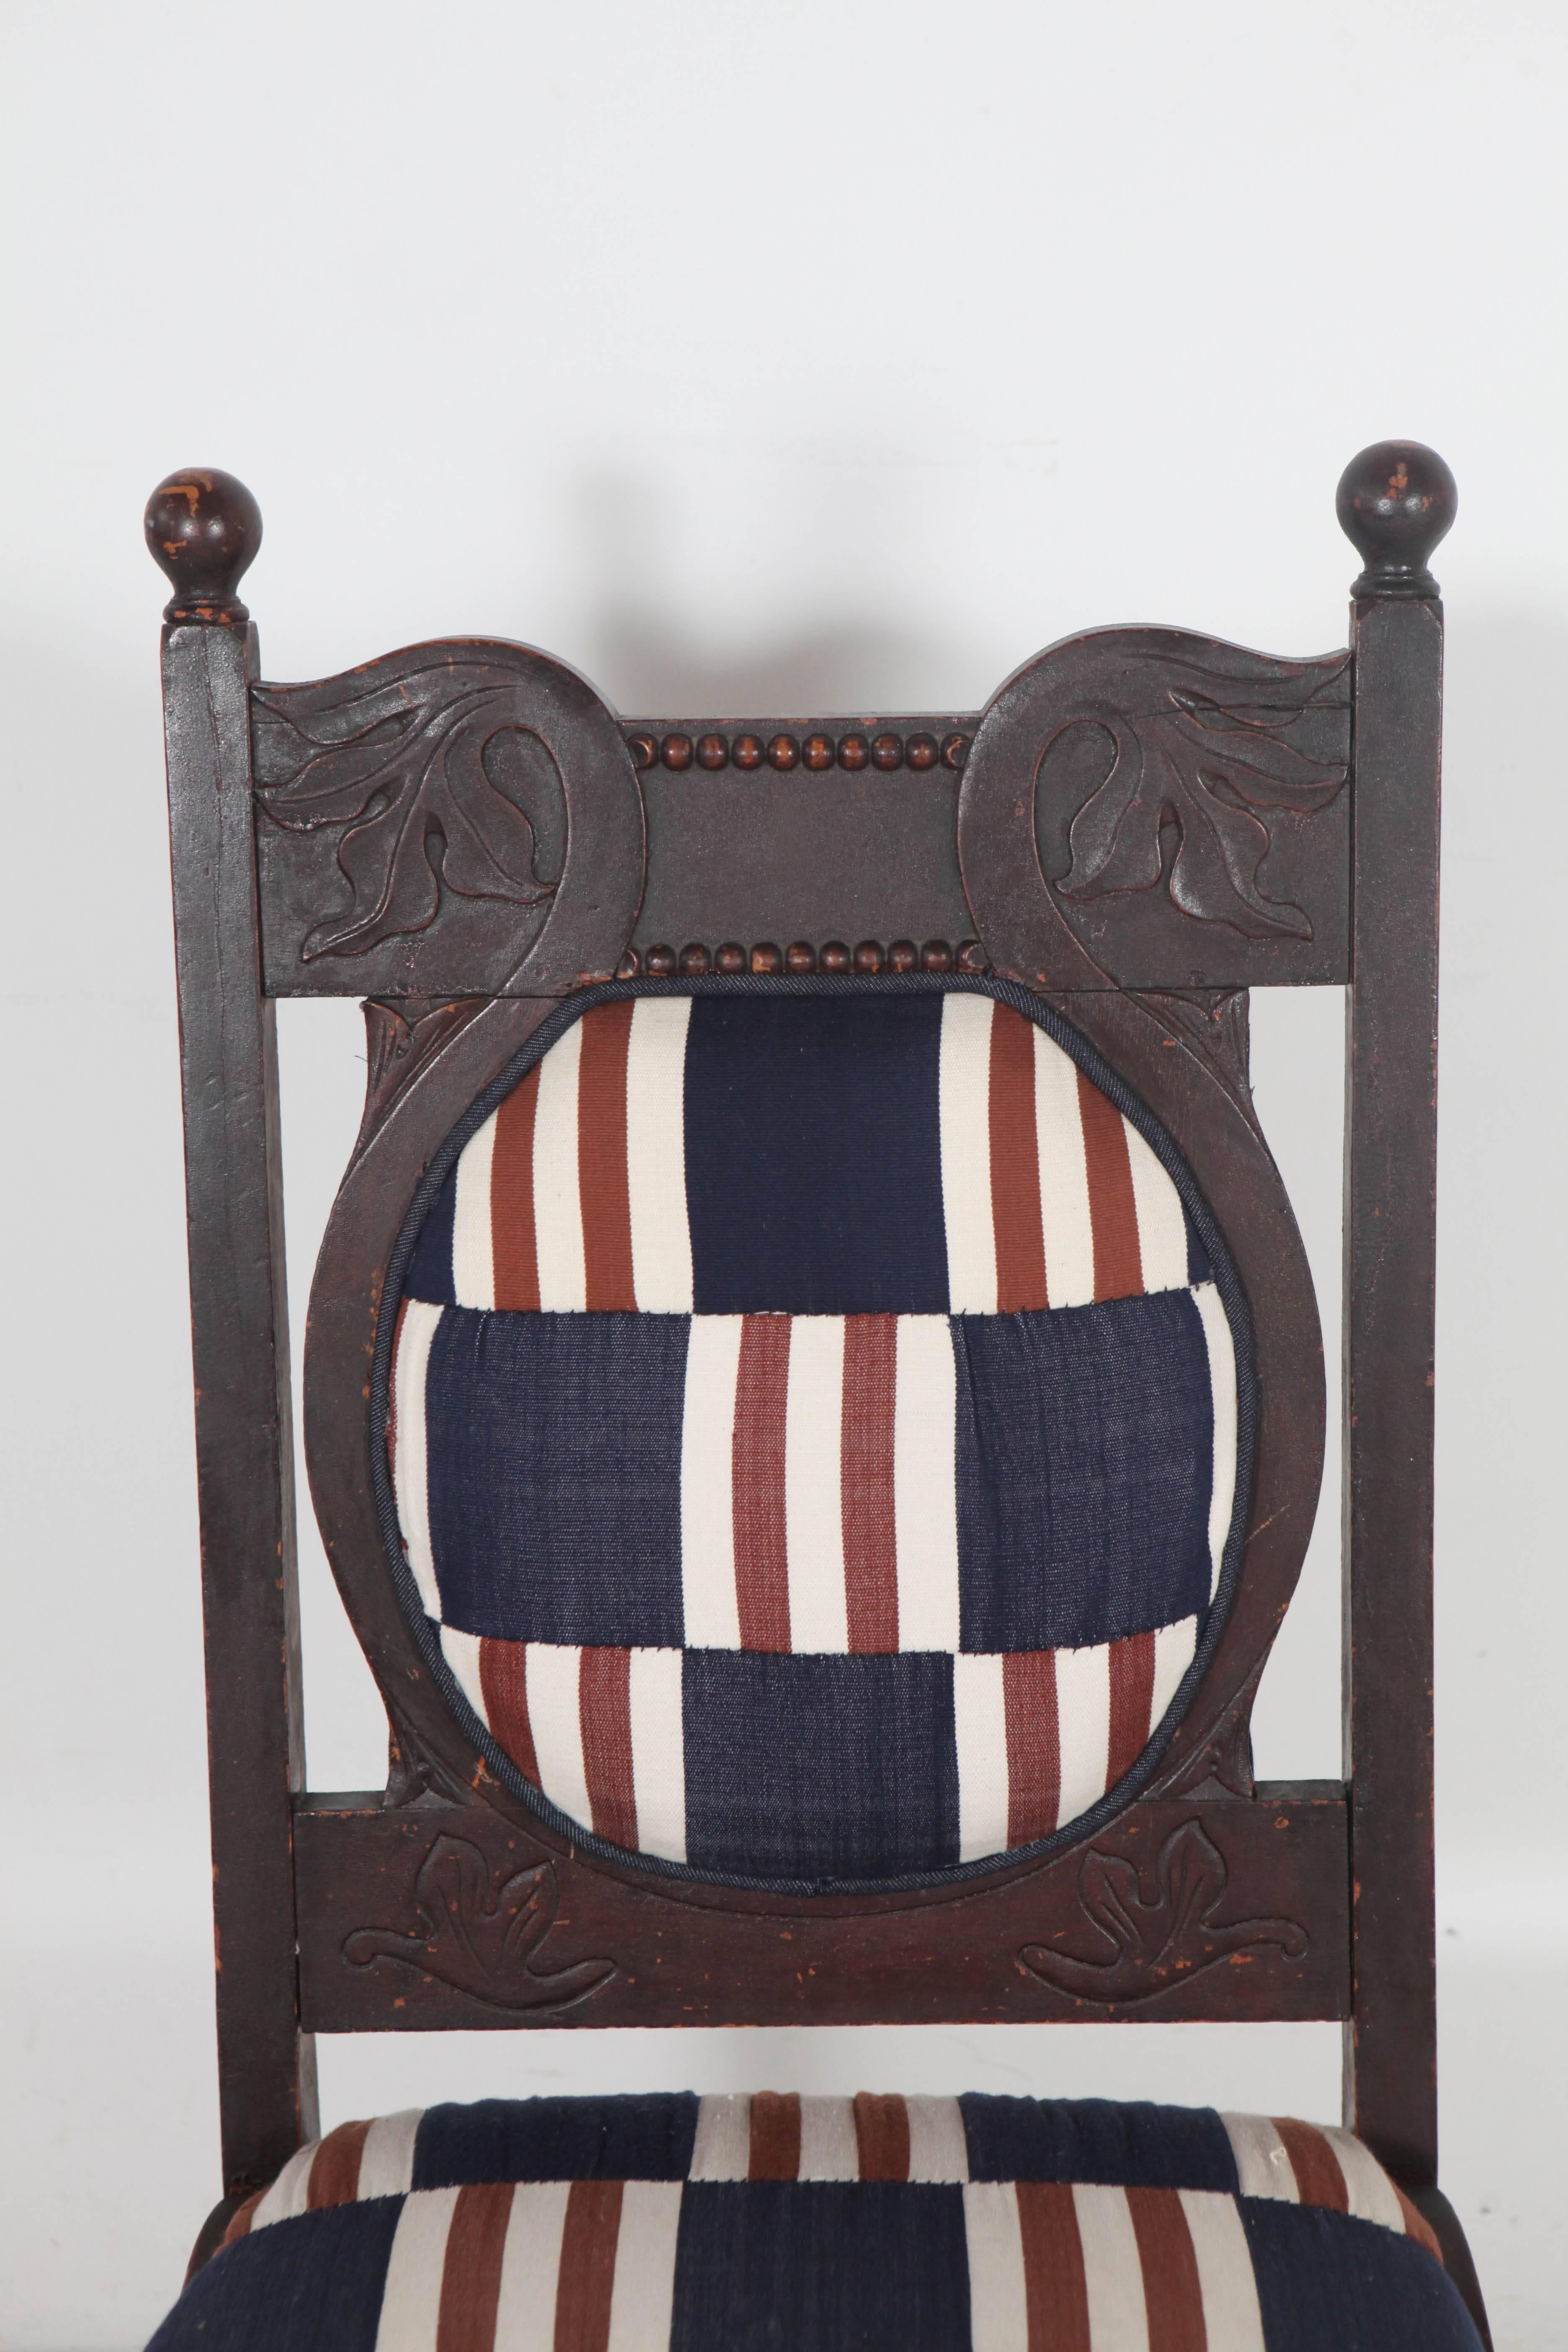 Late 20th Century Edwardian Salon Chairs Upholstered in Vintage African Fabric